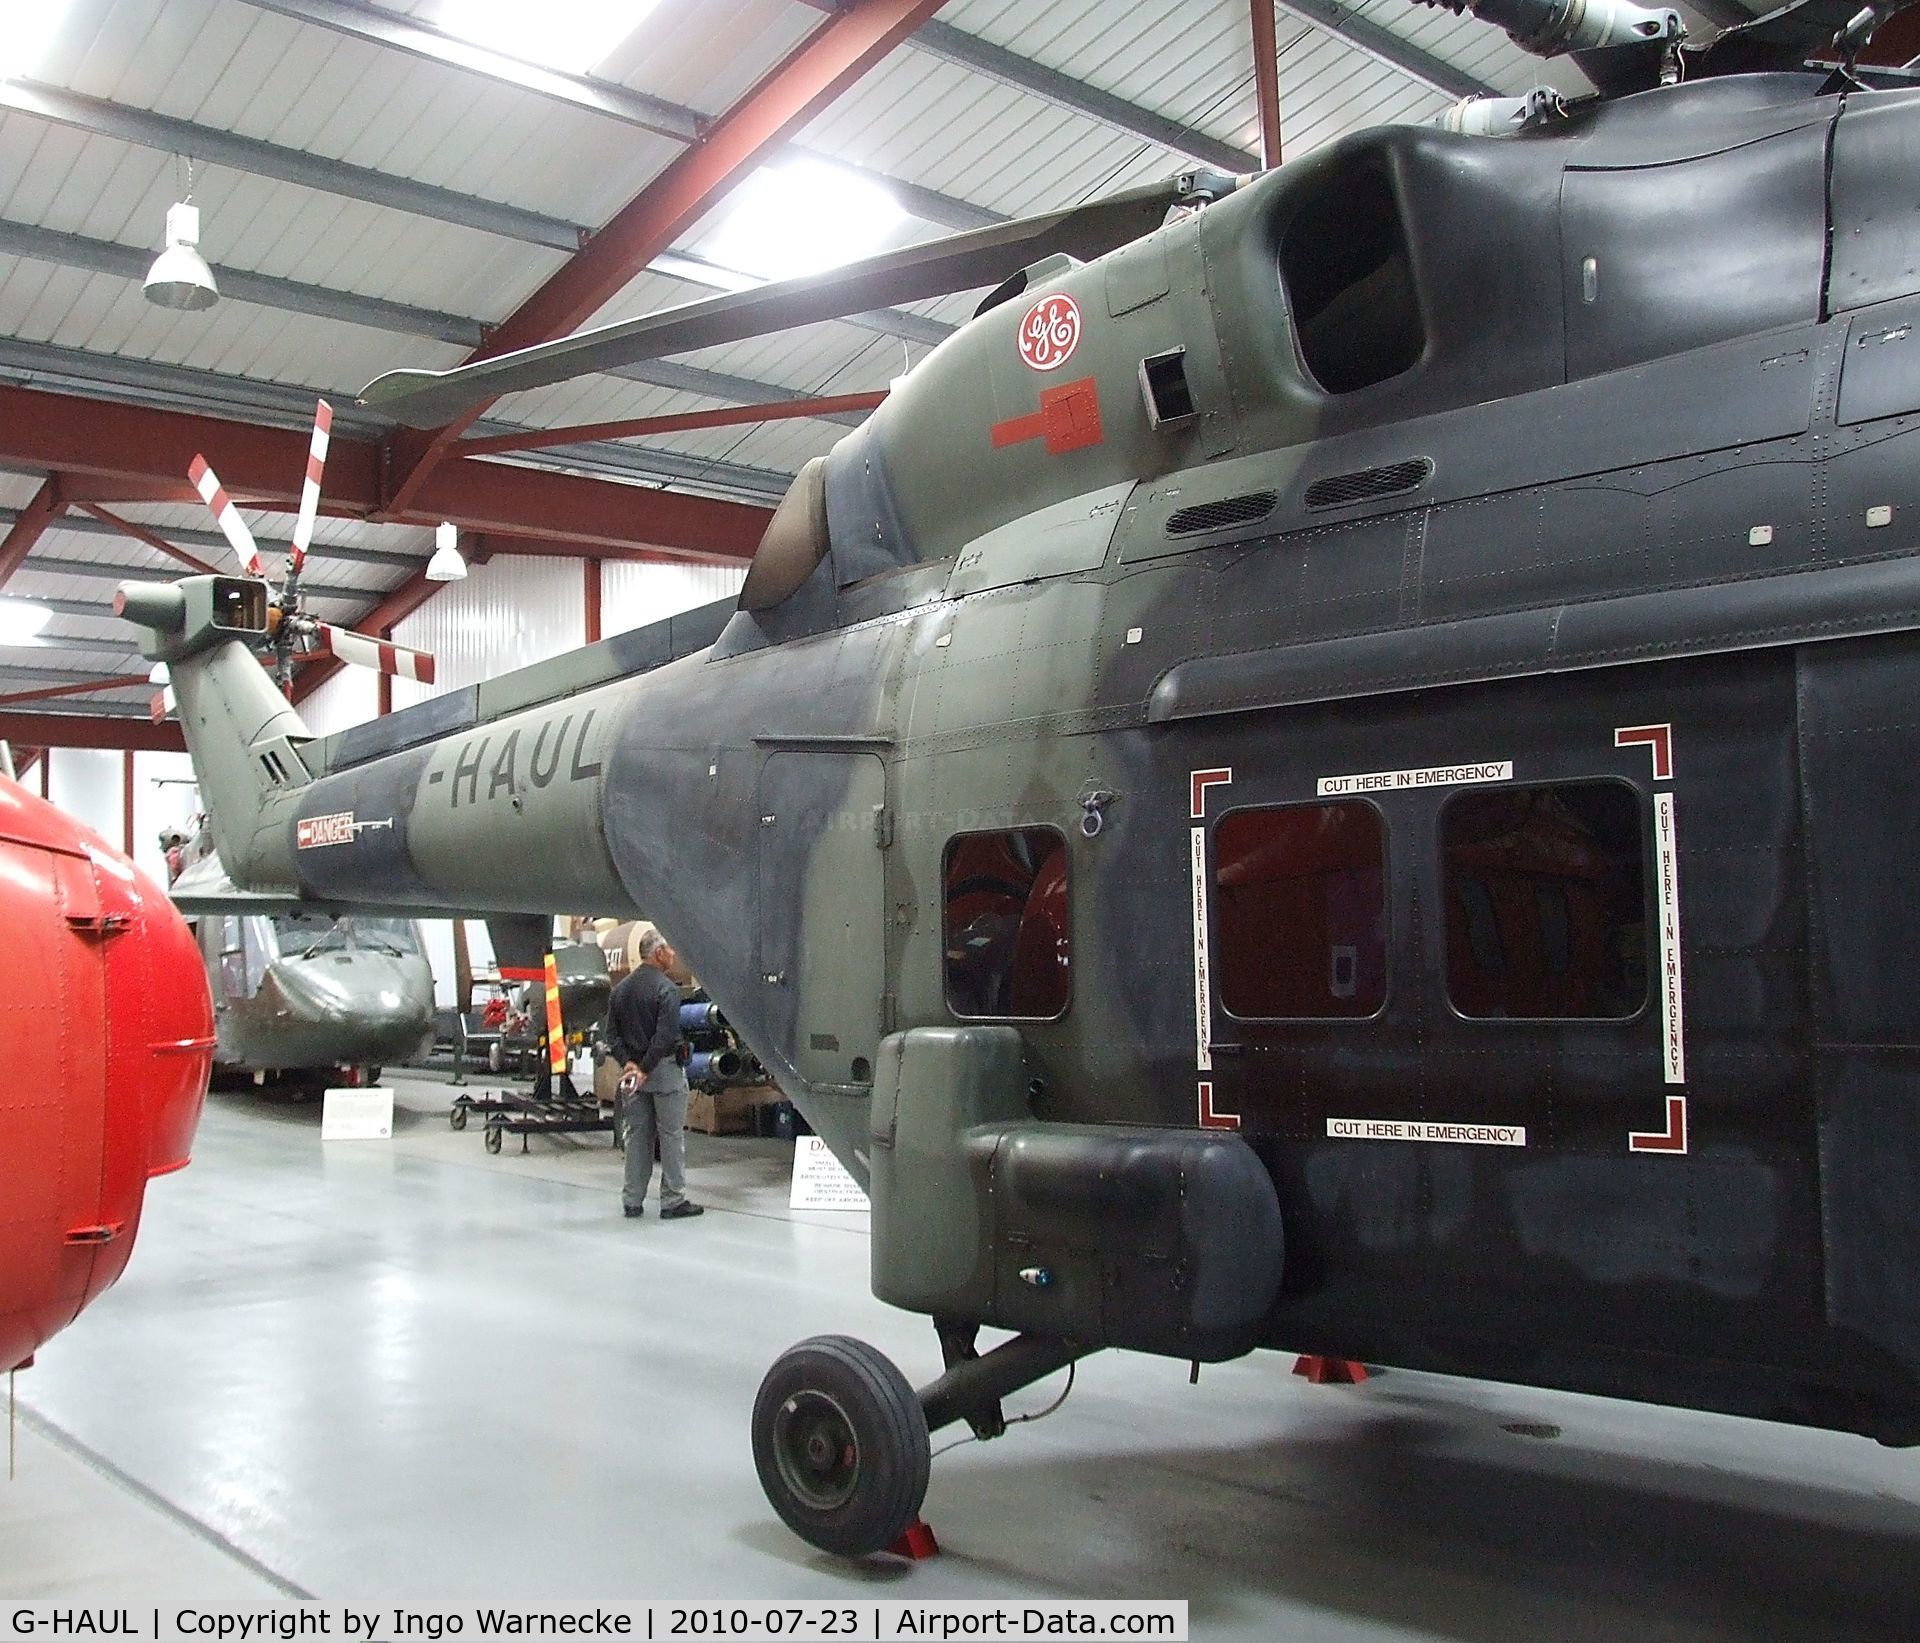 G-HAUL, 1986 Westland WG-30-300 C/N 020, Westland 30-300 at the Helicopter Museum, Weston-super-Mare